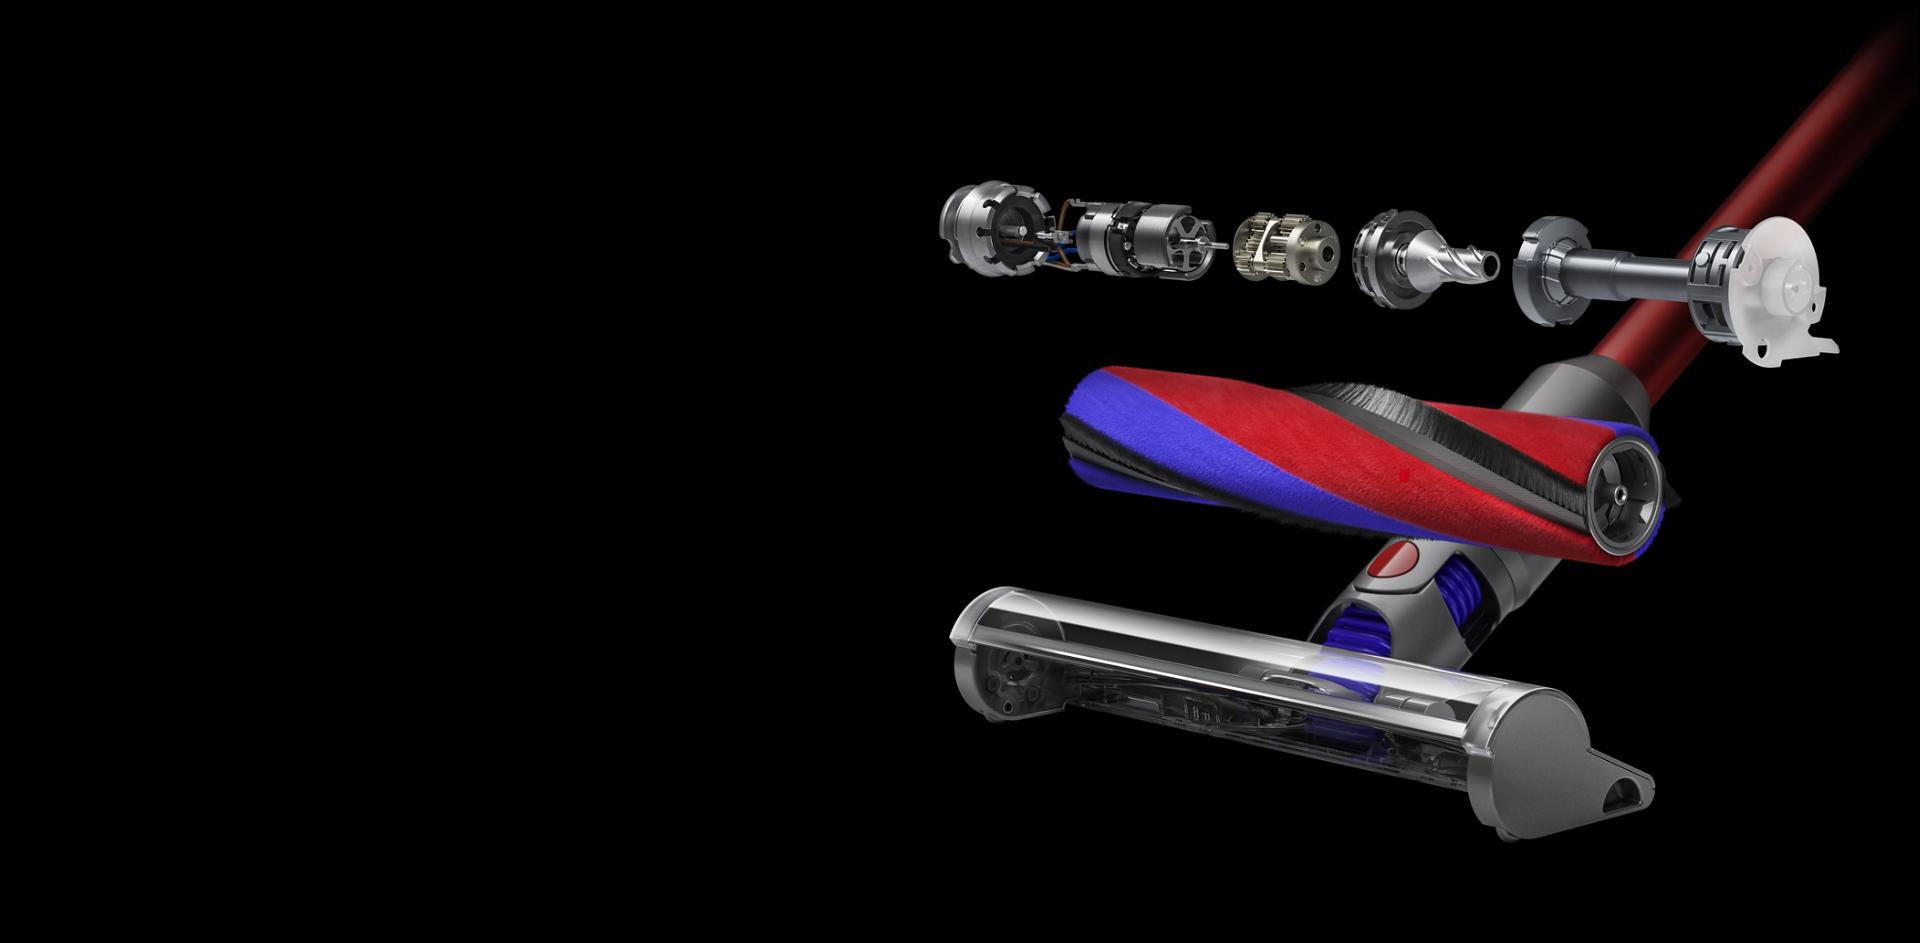 Cutaway image of the 40% lighter Dyson V8 Slim Fluffy cleaner head